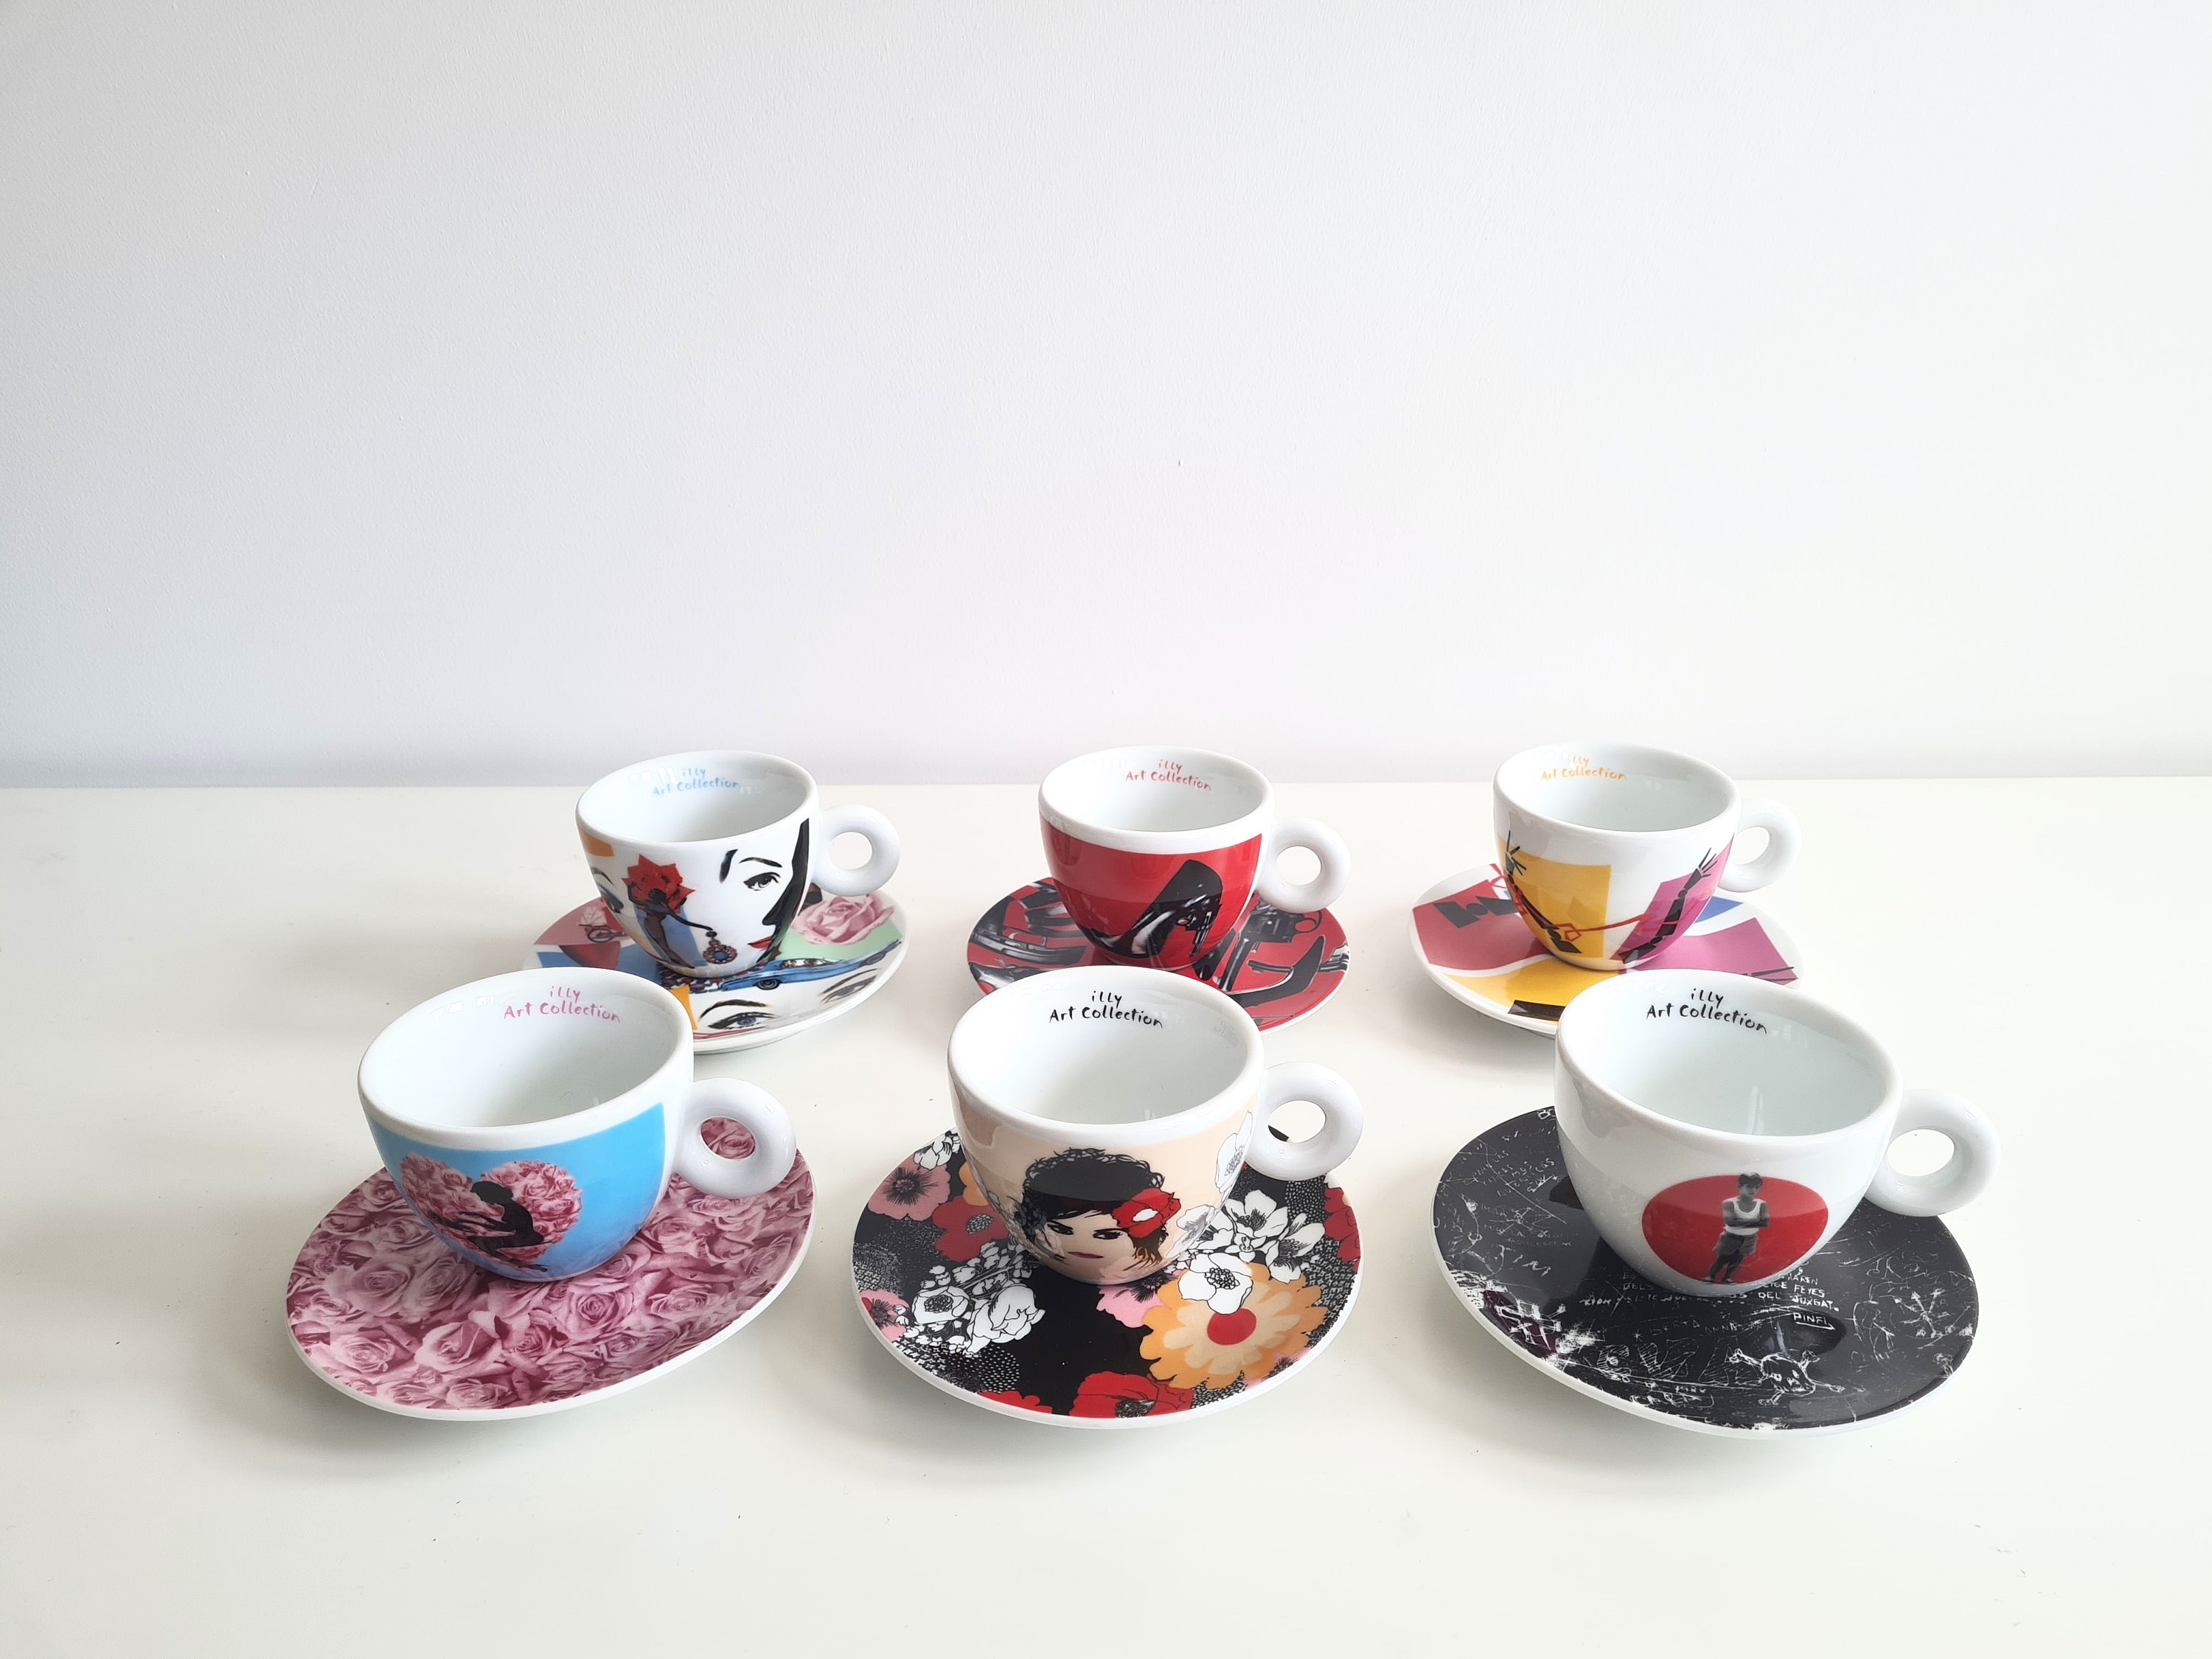 2 Tasses illy art collection Norma Jean